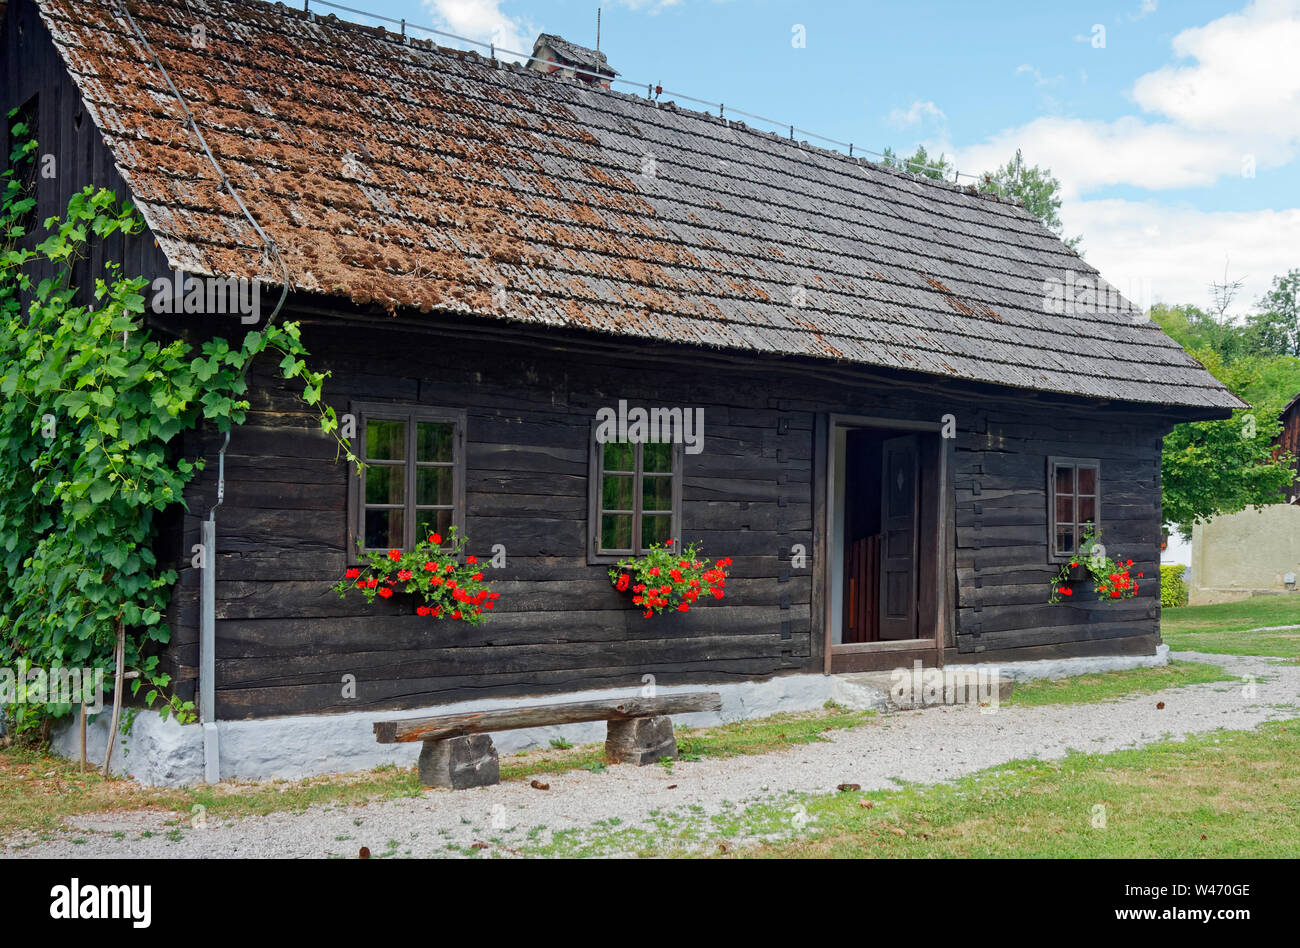 old log house, window boxes, red flowers, rural, building, Josip Broz Tito's birthplace village; Ethnological Museum Staro selo; Kumrovec; Croatia; su Stock Photo